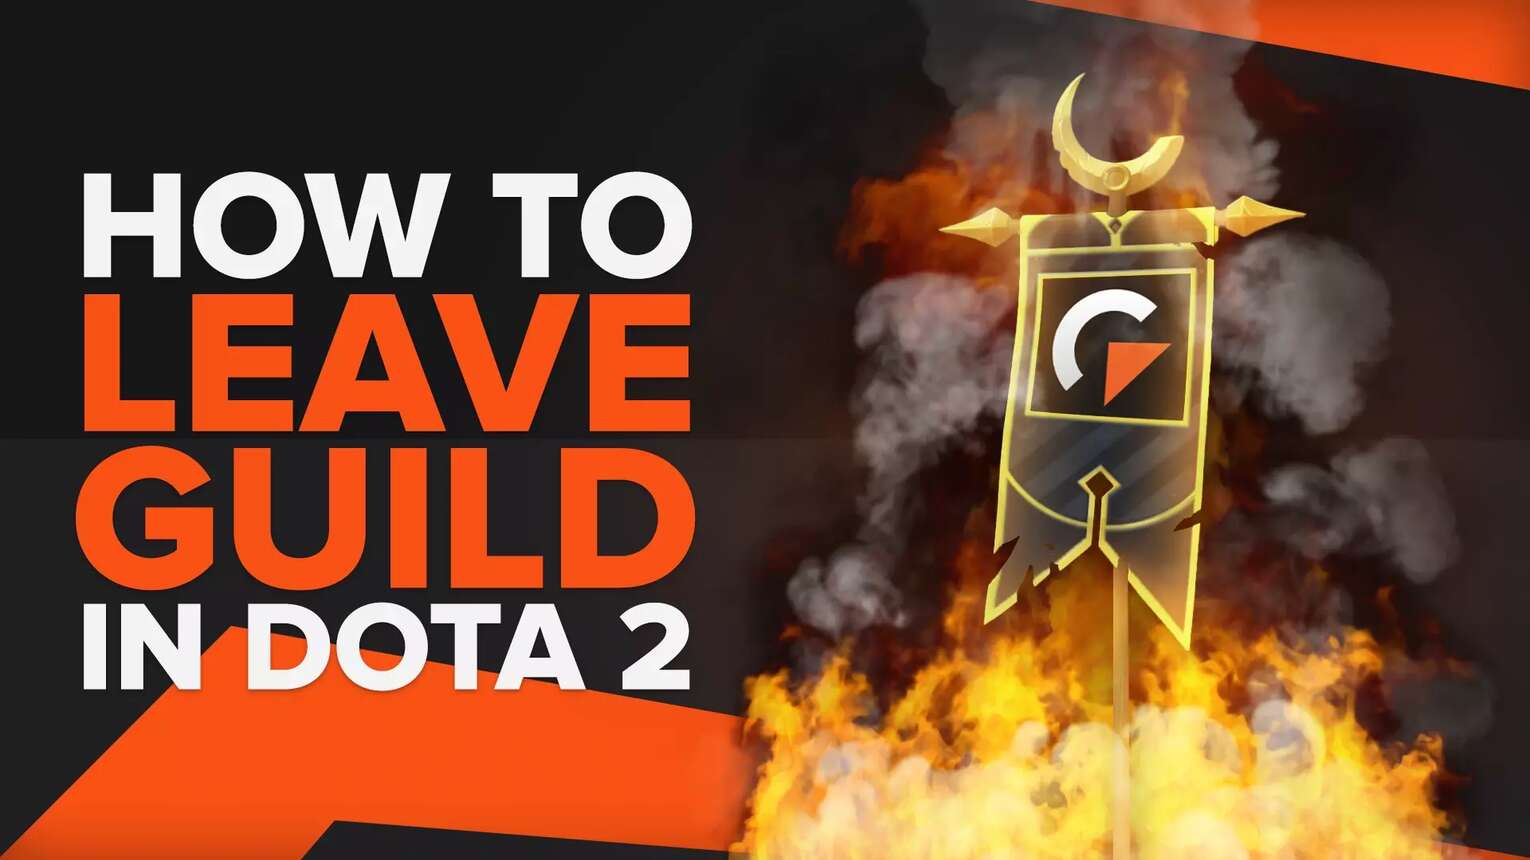 How to Leave Guild in Dota 2 (in 2 Simple Steps)